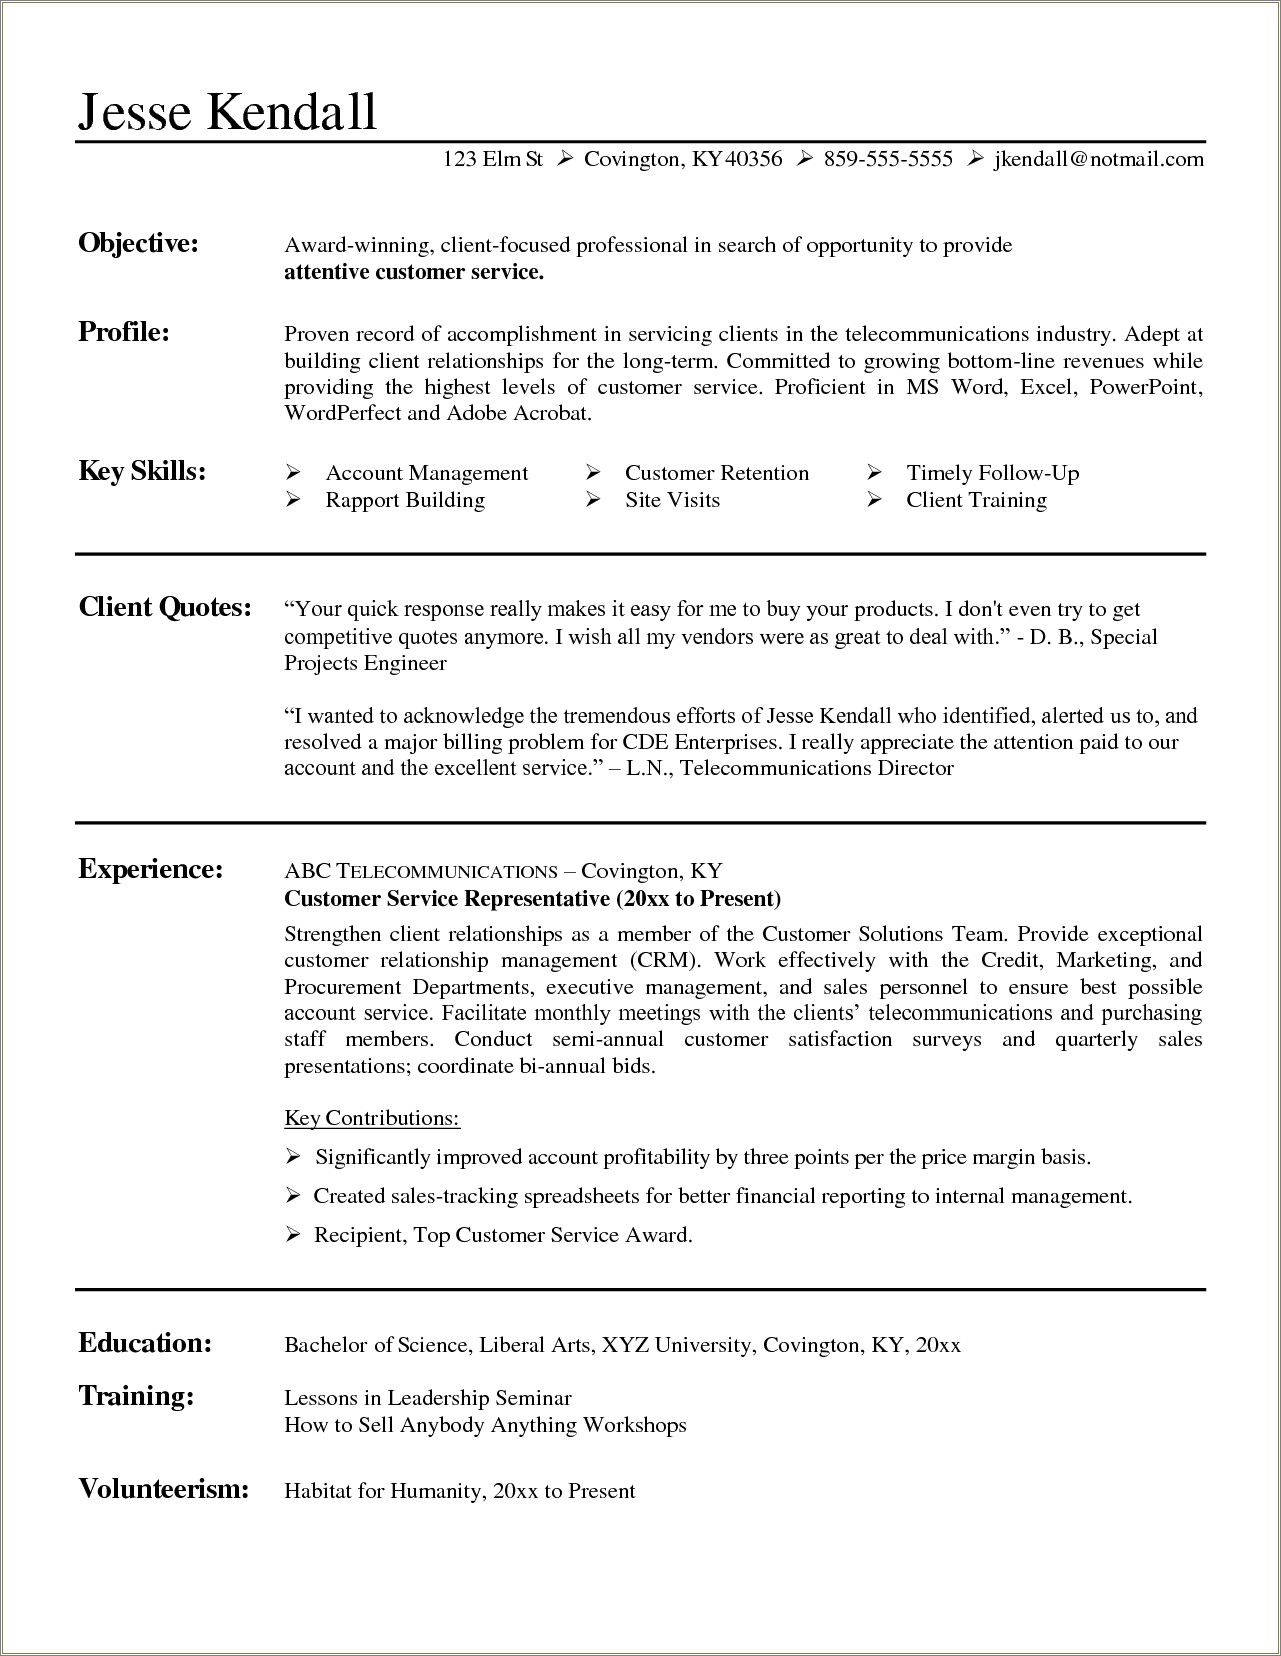 Customer Service And Sales Resume Template